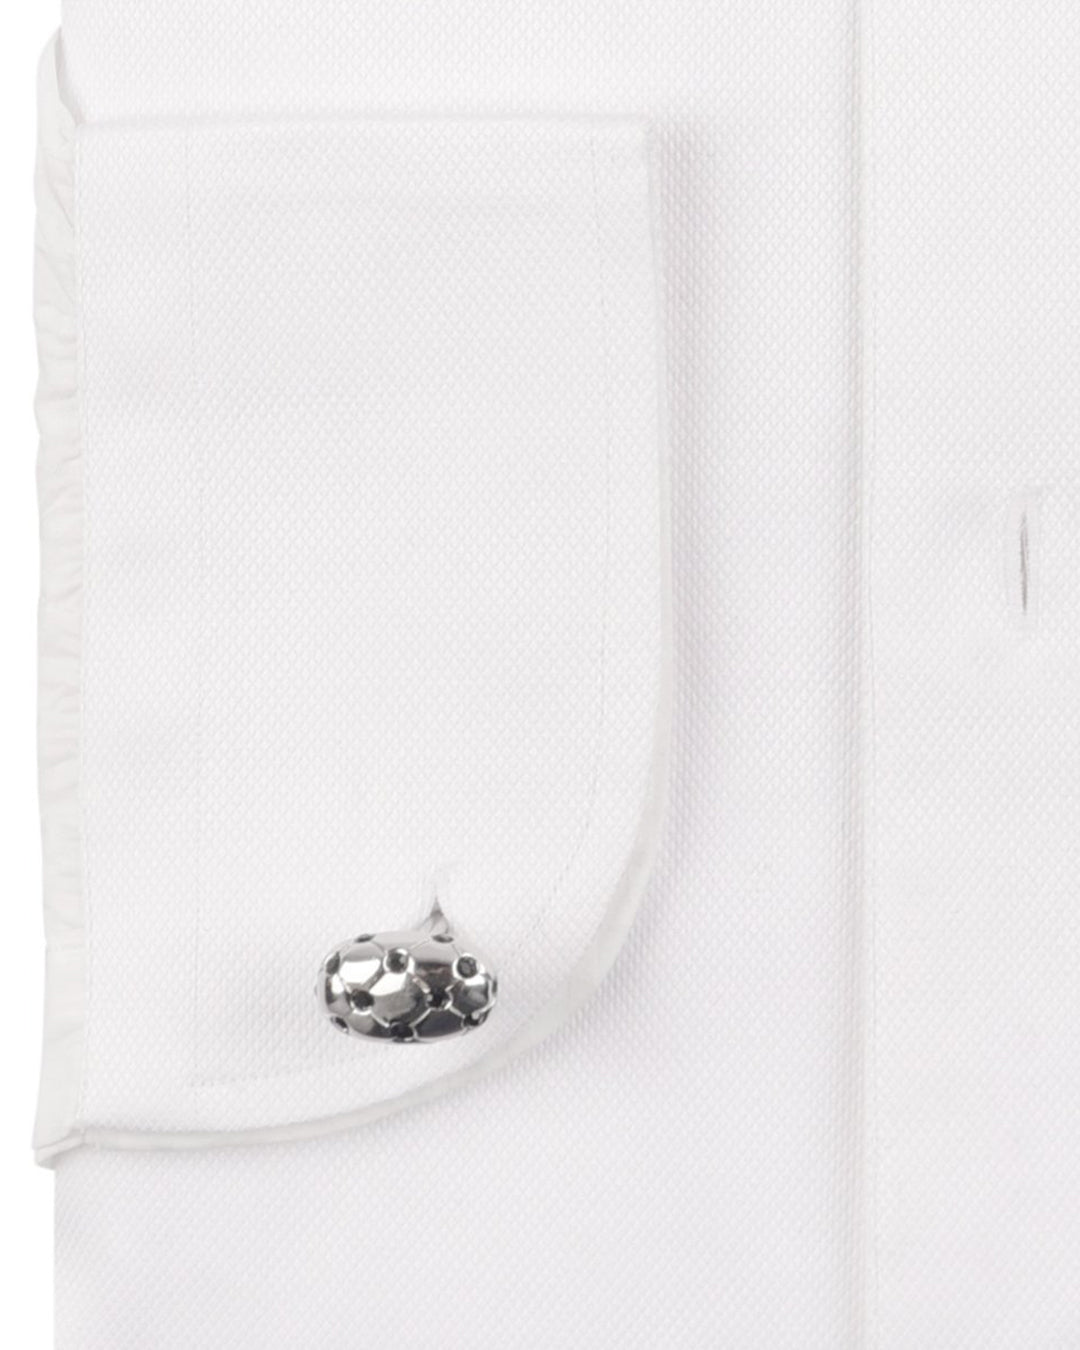 Cuff of the mens tuxedo shirt by Luxire in white